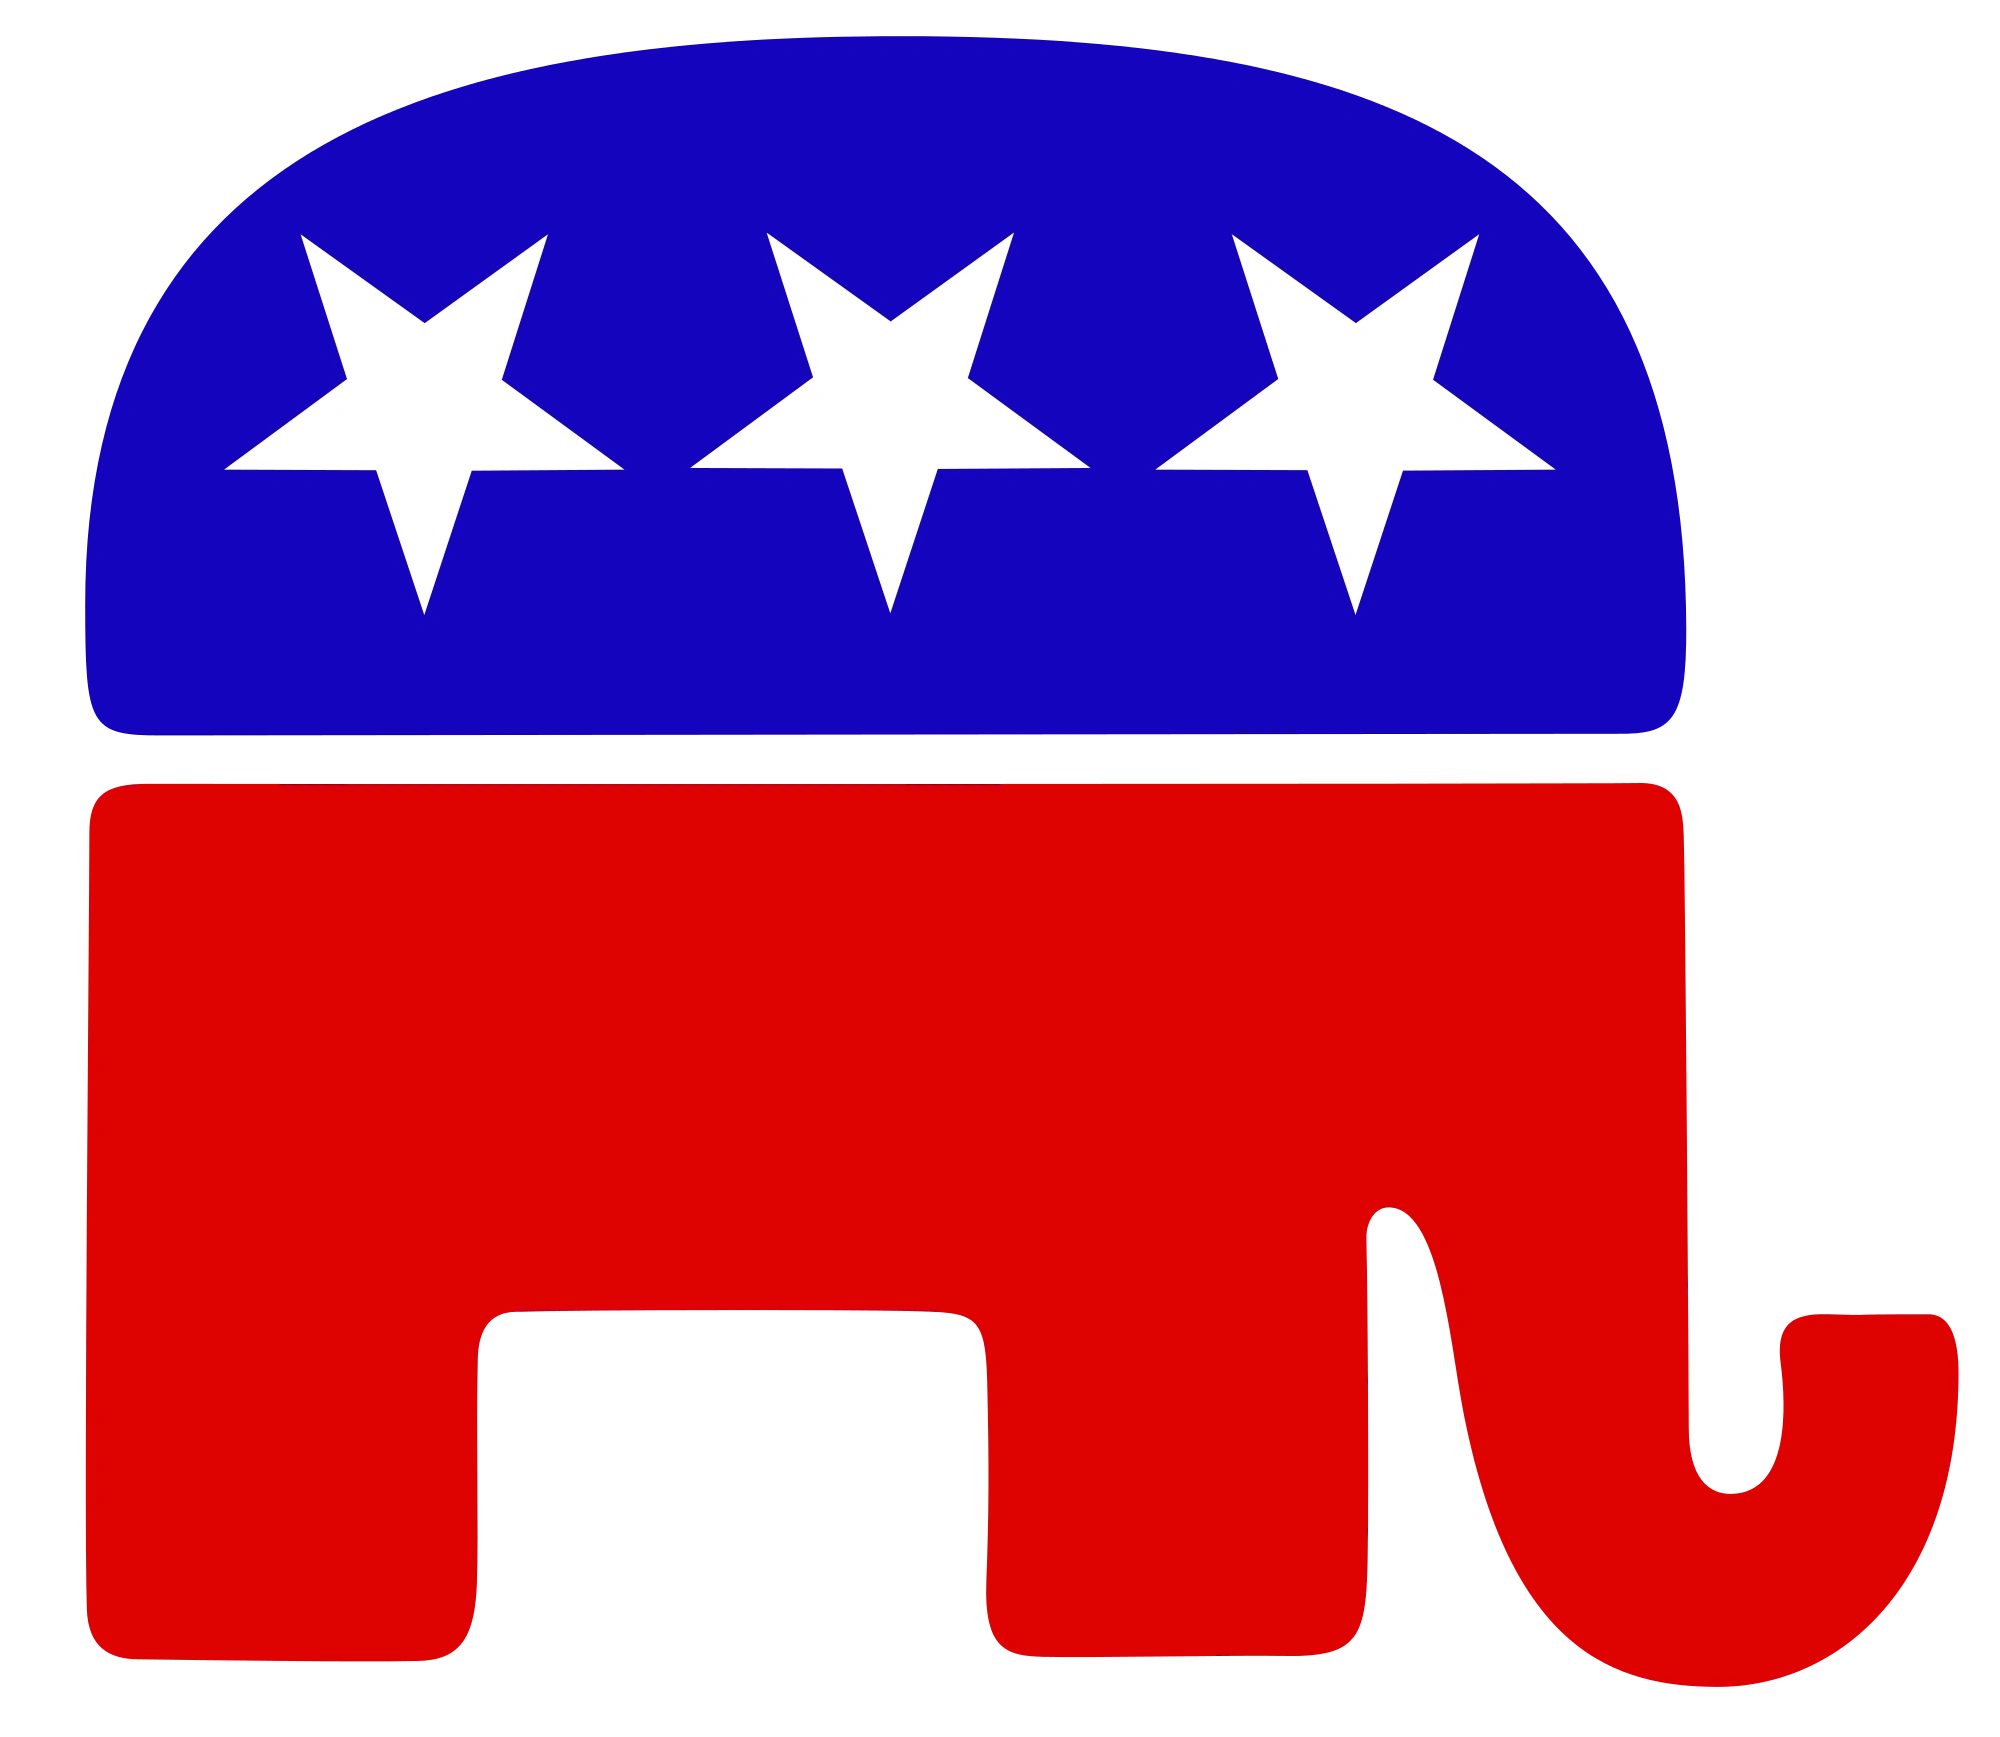 Cabell County Republican Executive Committee